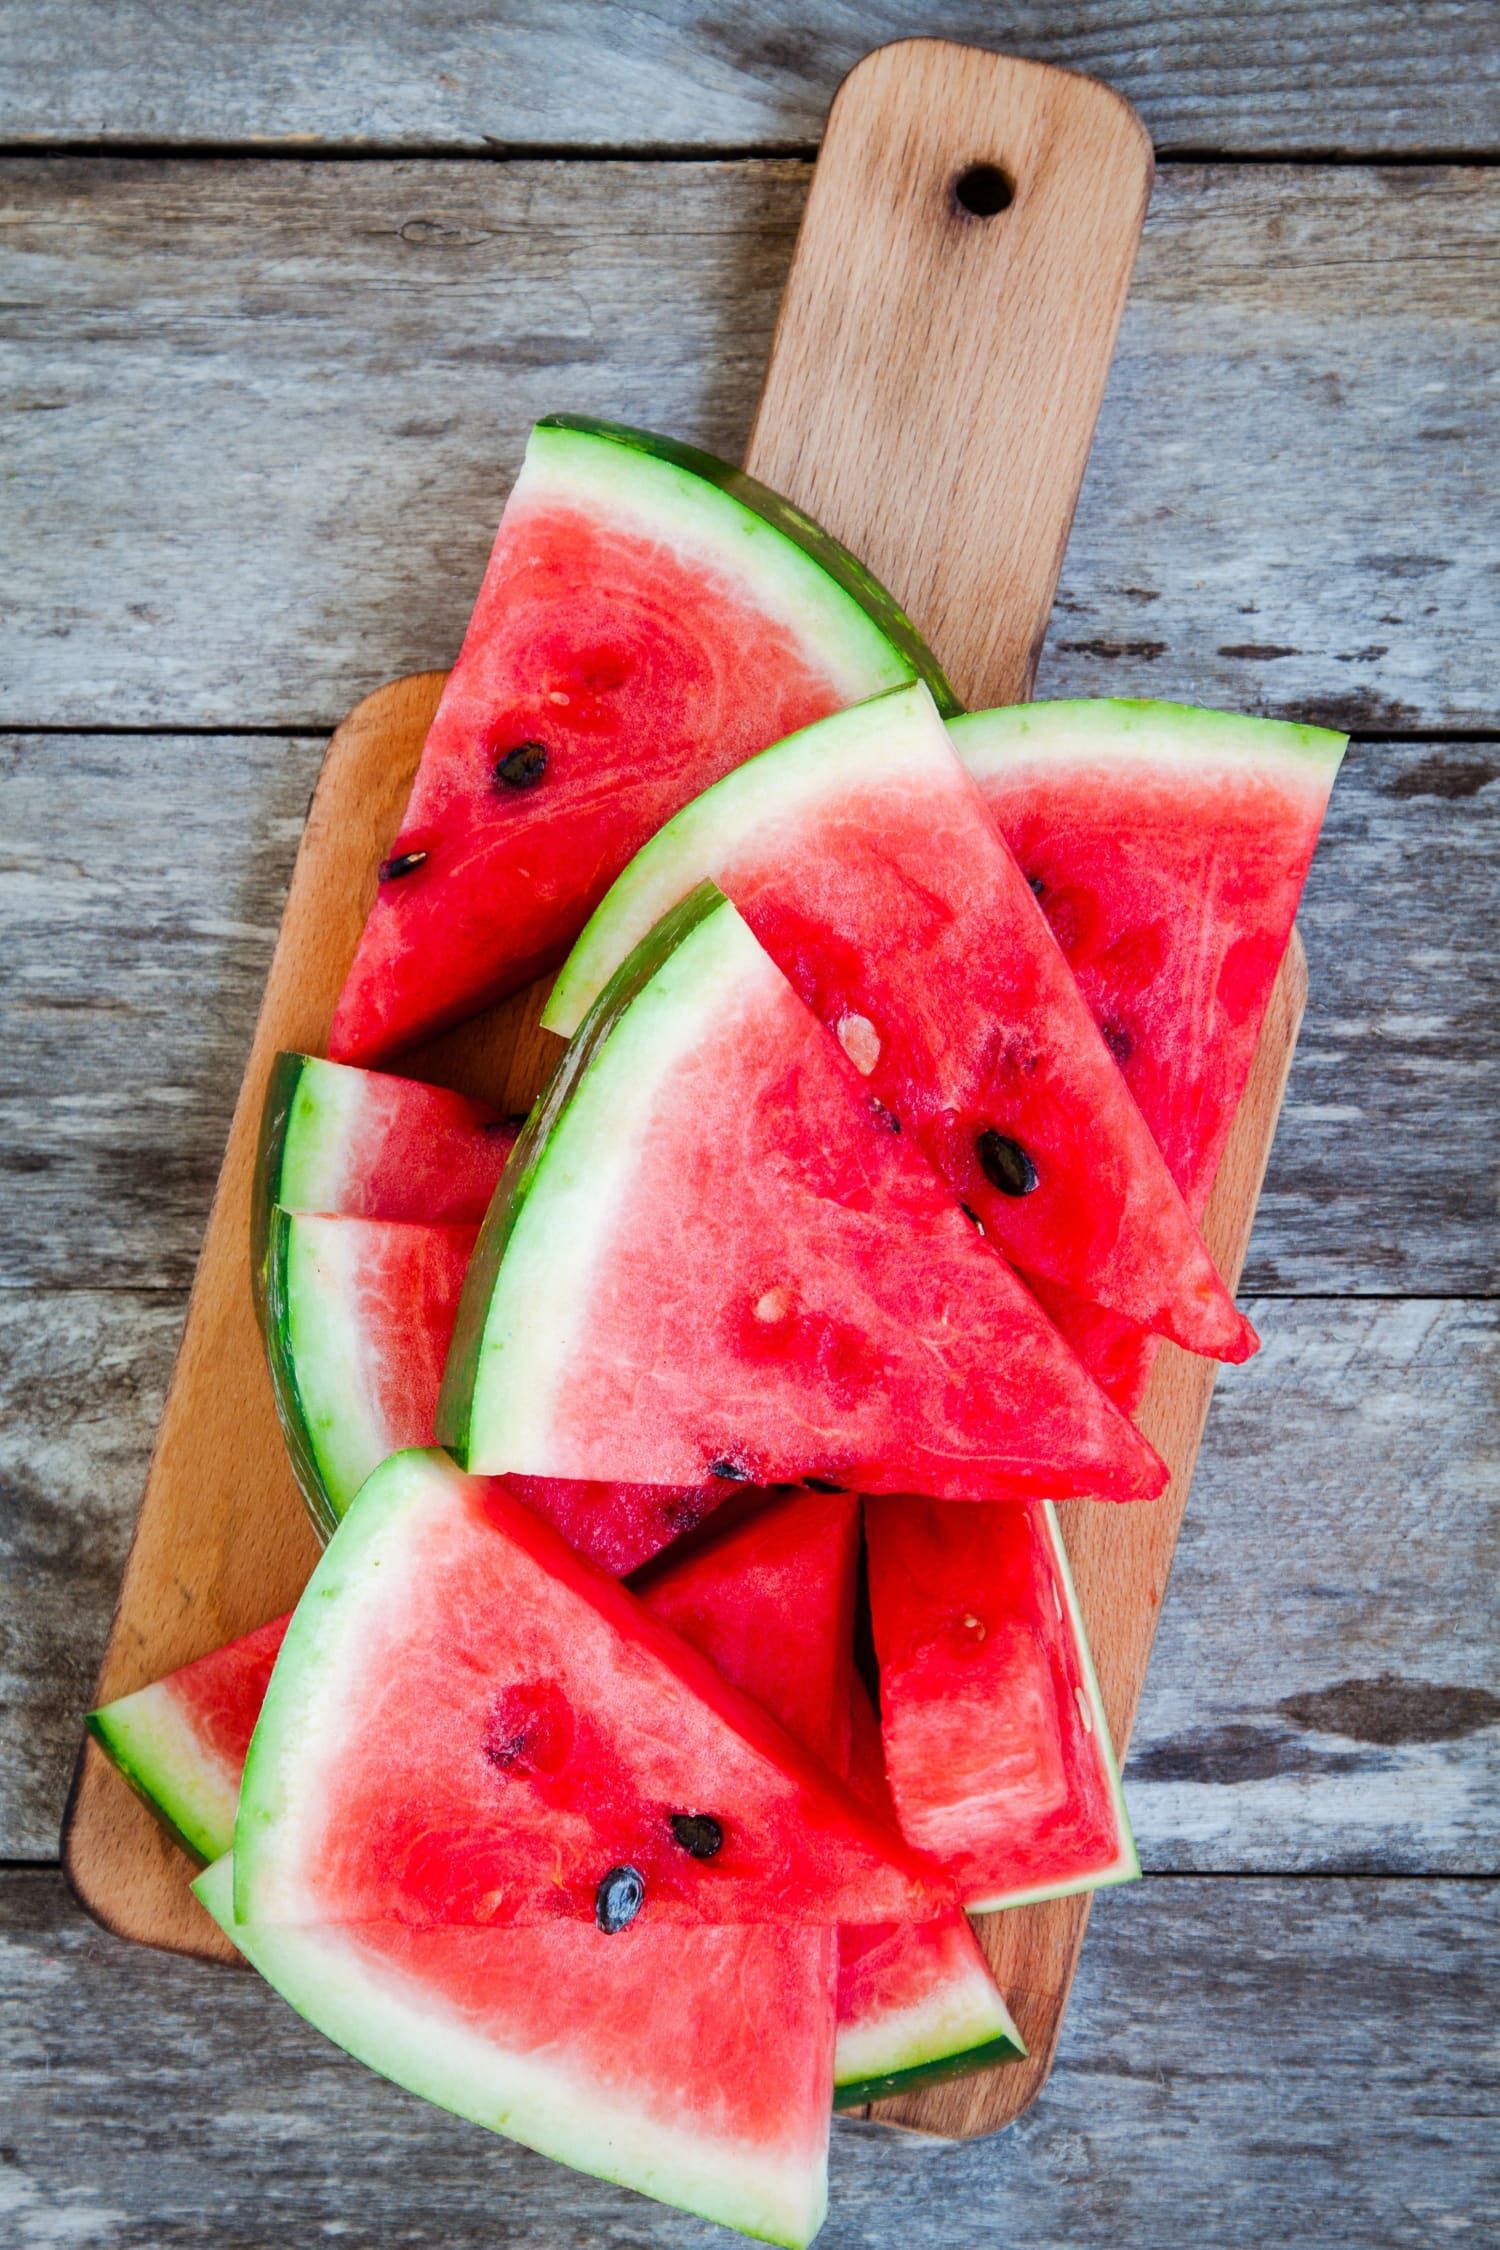 How Many Cups of Fruit Are in a Pound of Watermelon?